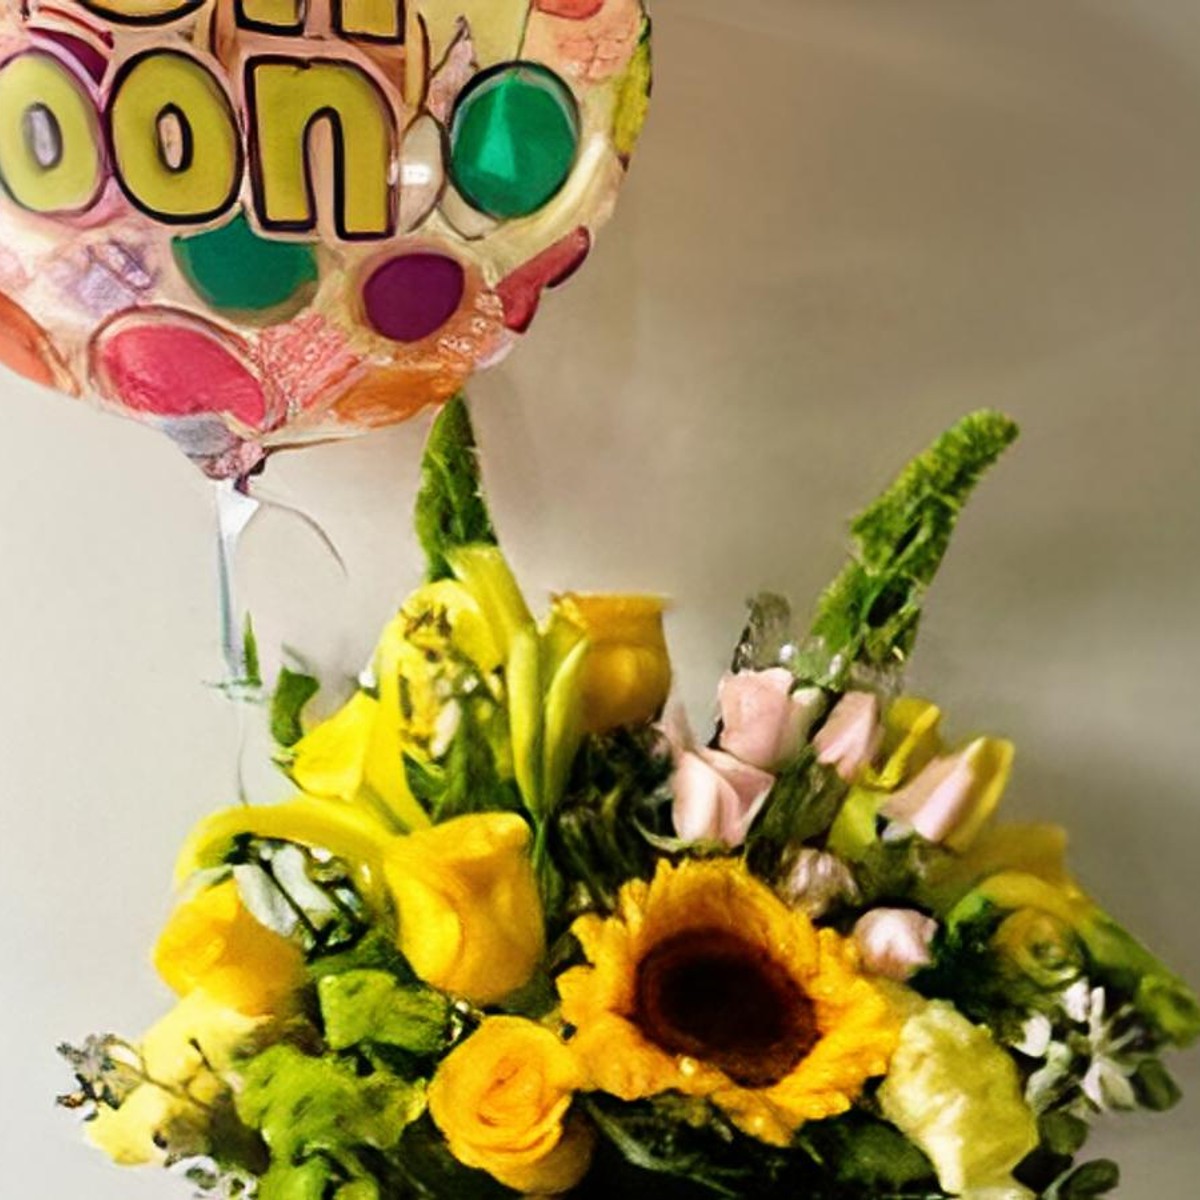 Sunny Days Get Well Soon Bouquet by Baezas Flowers and Decorations